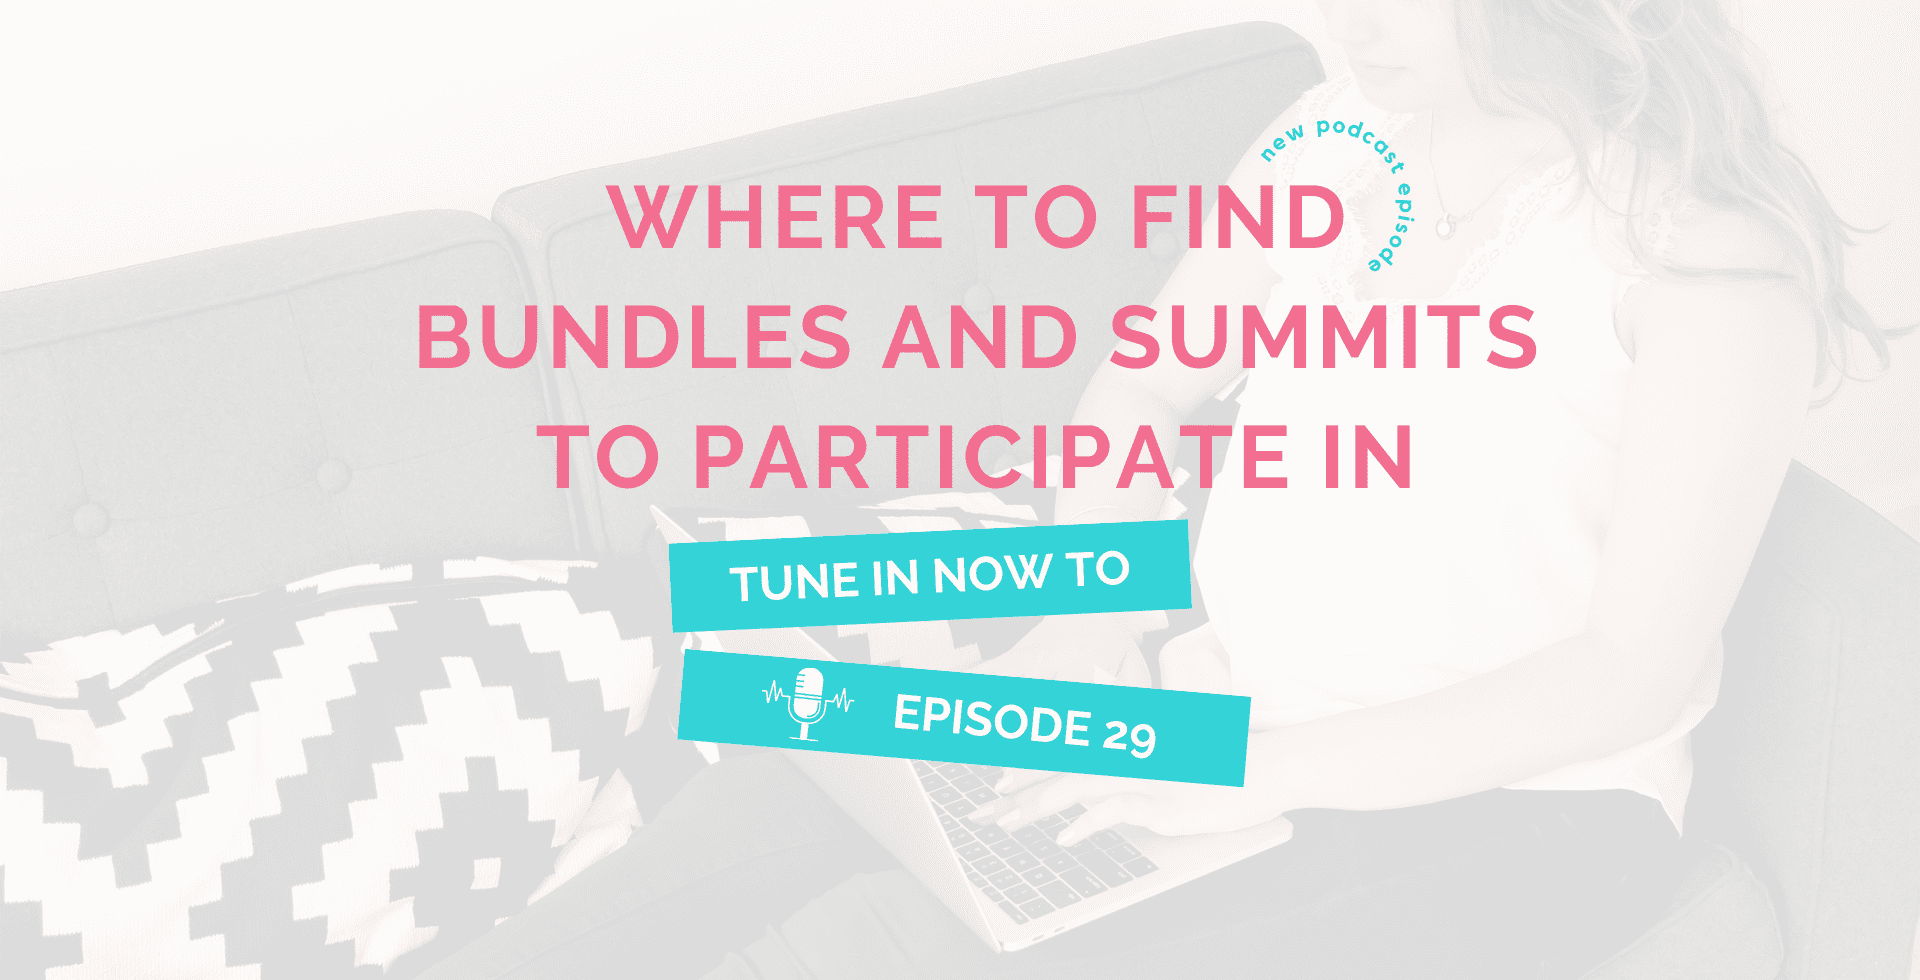 Where to Find Bundles and Summits to Participate In